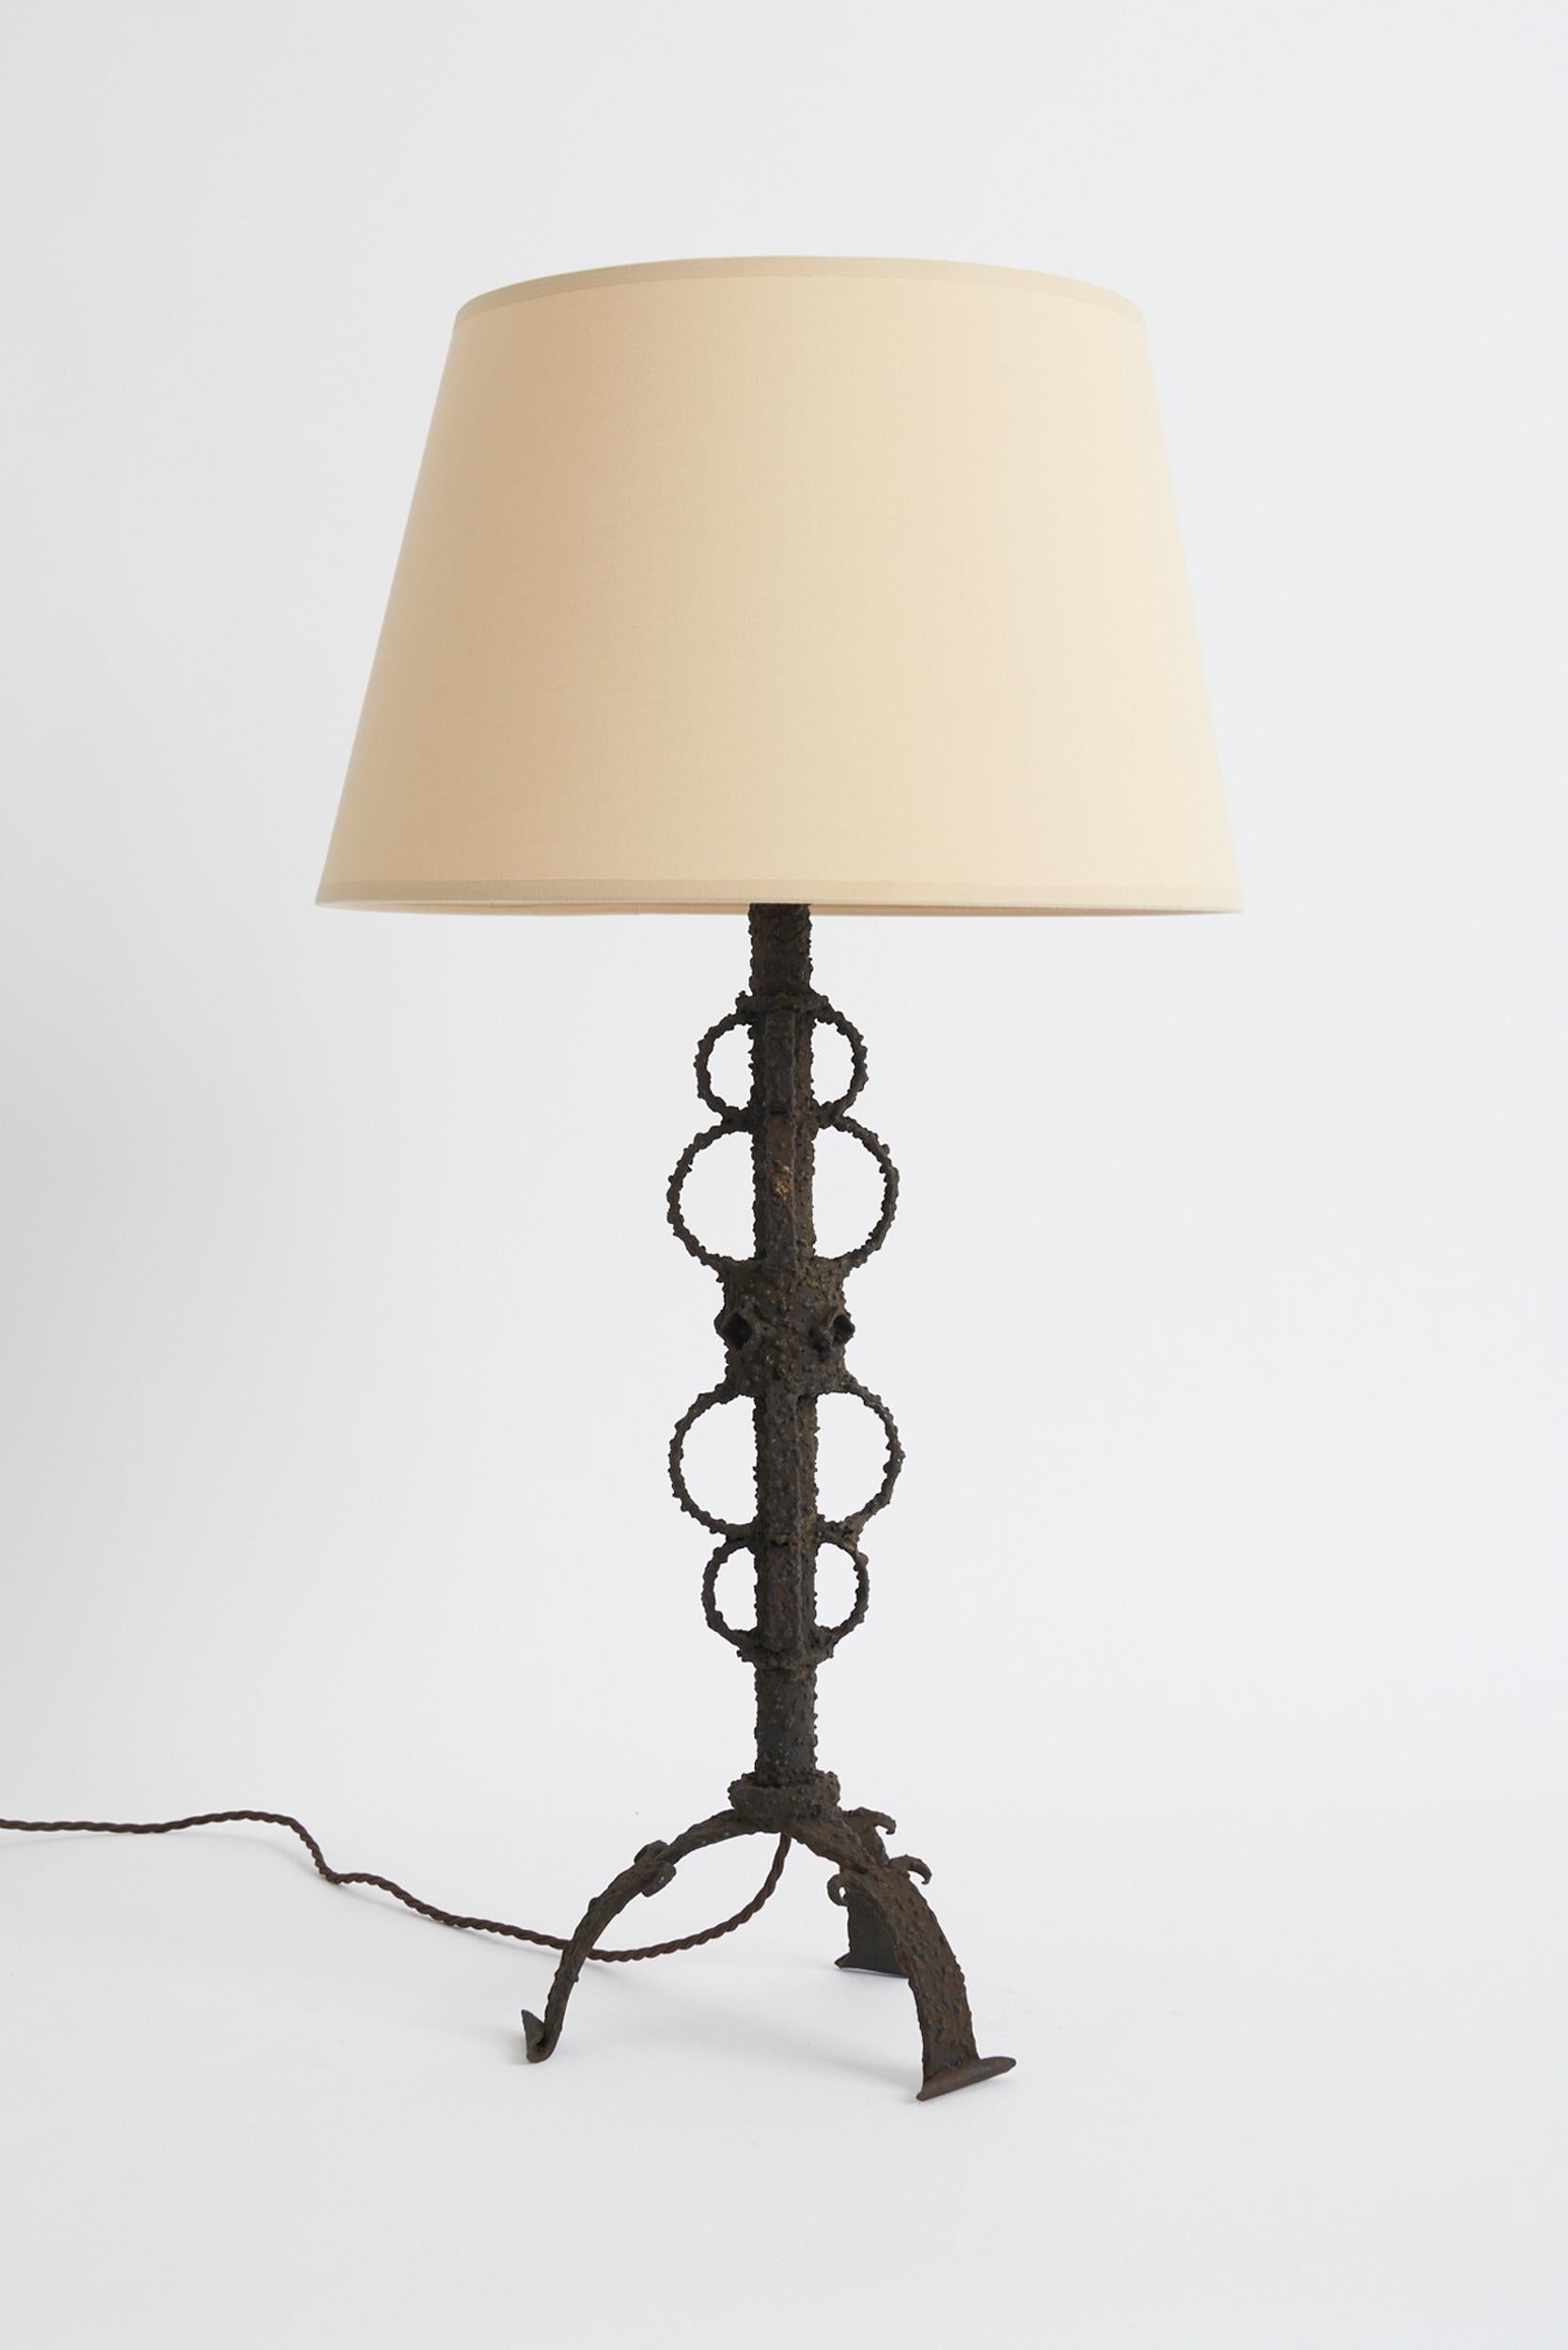 A Brutalist wrought iron table lamp.
Spain, mid 20th Century
With the shade: 75 cm high by 35.5 cm diameter
Lamp base only: 57 cm high by 22 cm diameter